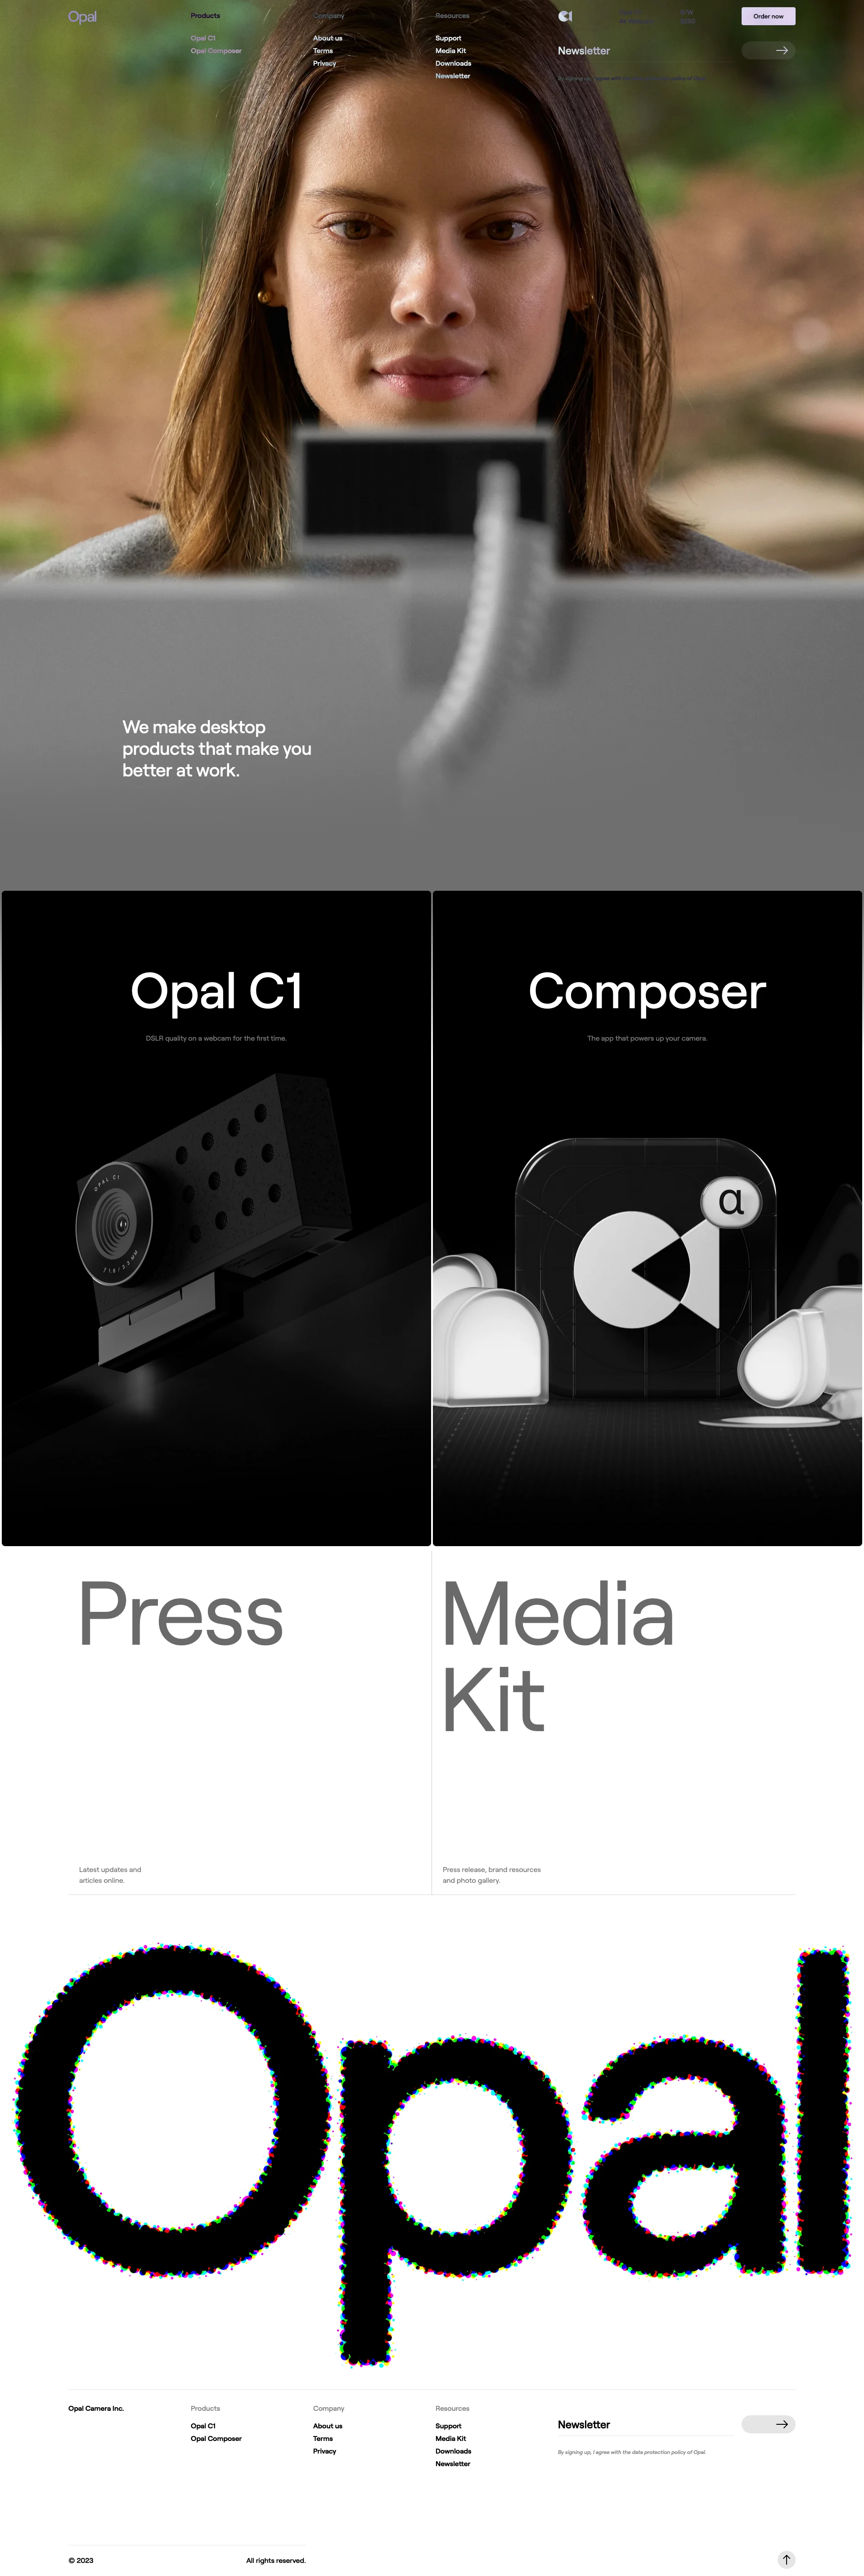 Opal Camera Inc Landing Page Example: Opal makes it easy to look and sound professional on video calls. We built the Opal C1, the first professional camera and Composer, the best video editing camera software companion.